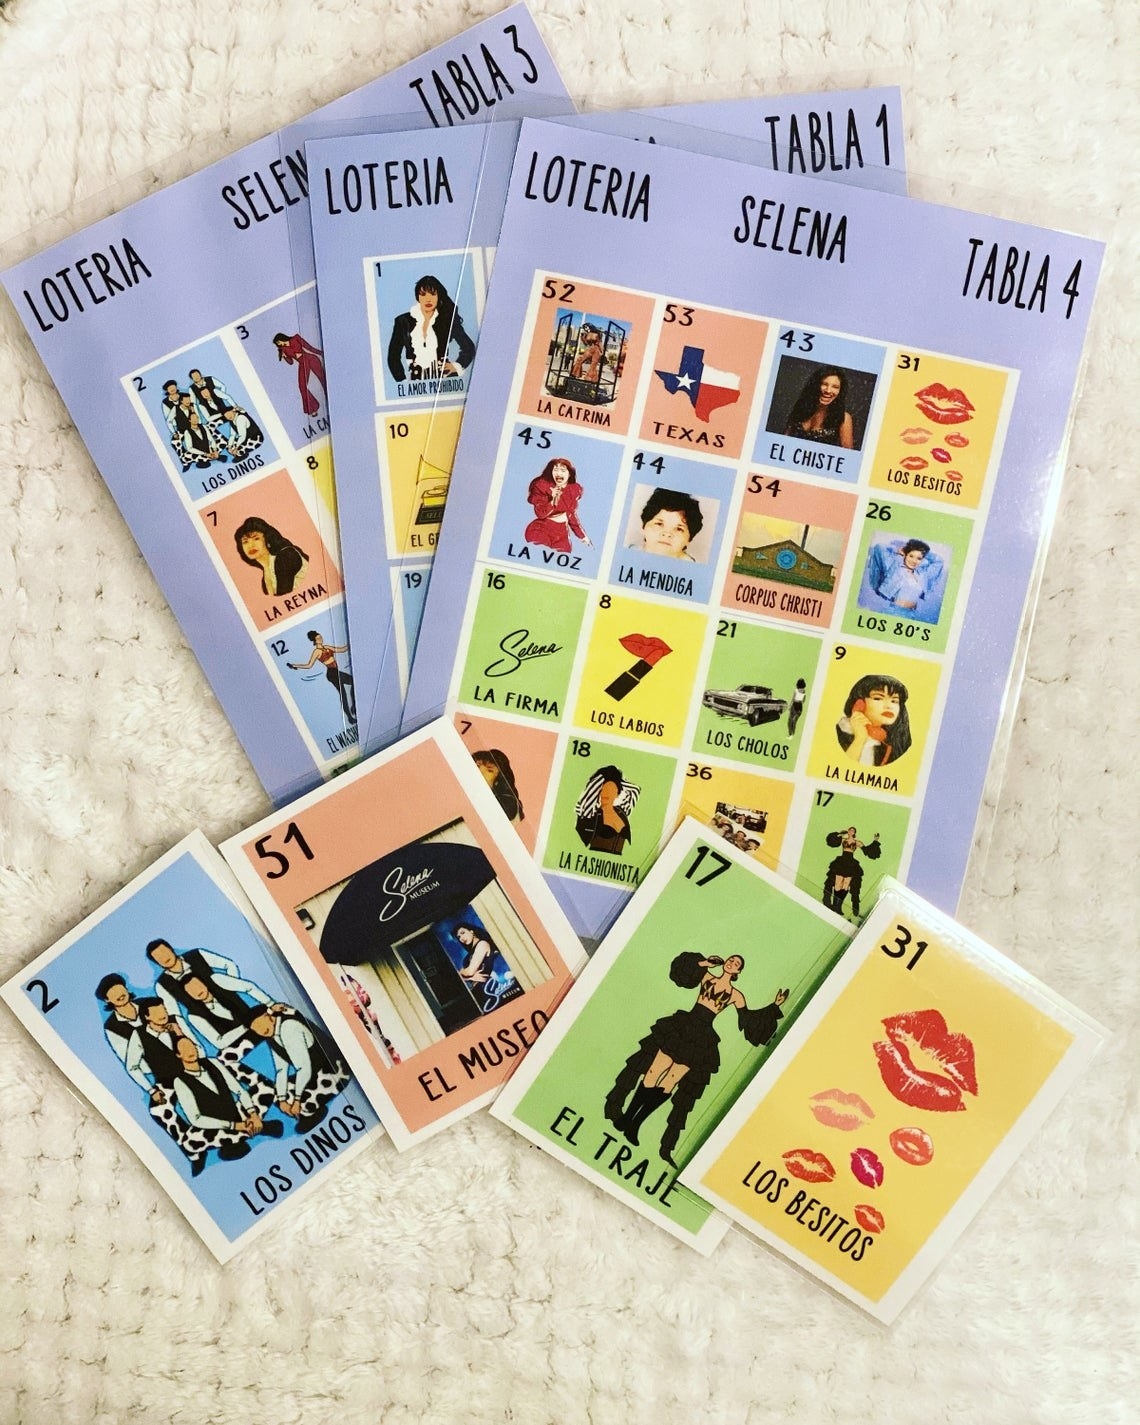 The Selena Loteria game laid out to show the images of the playing cards